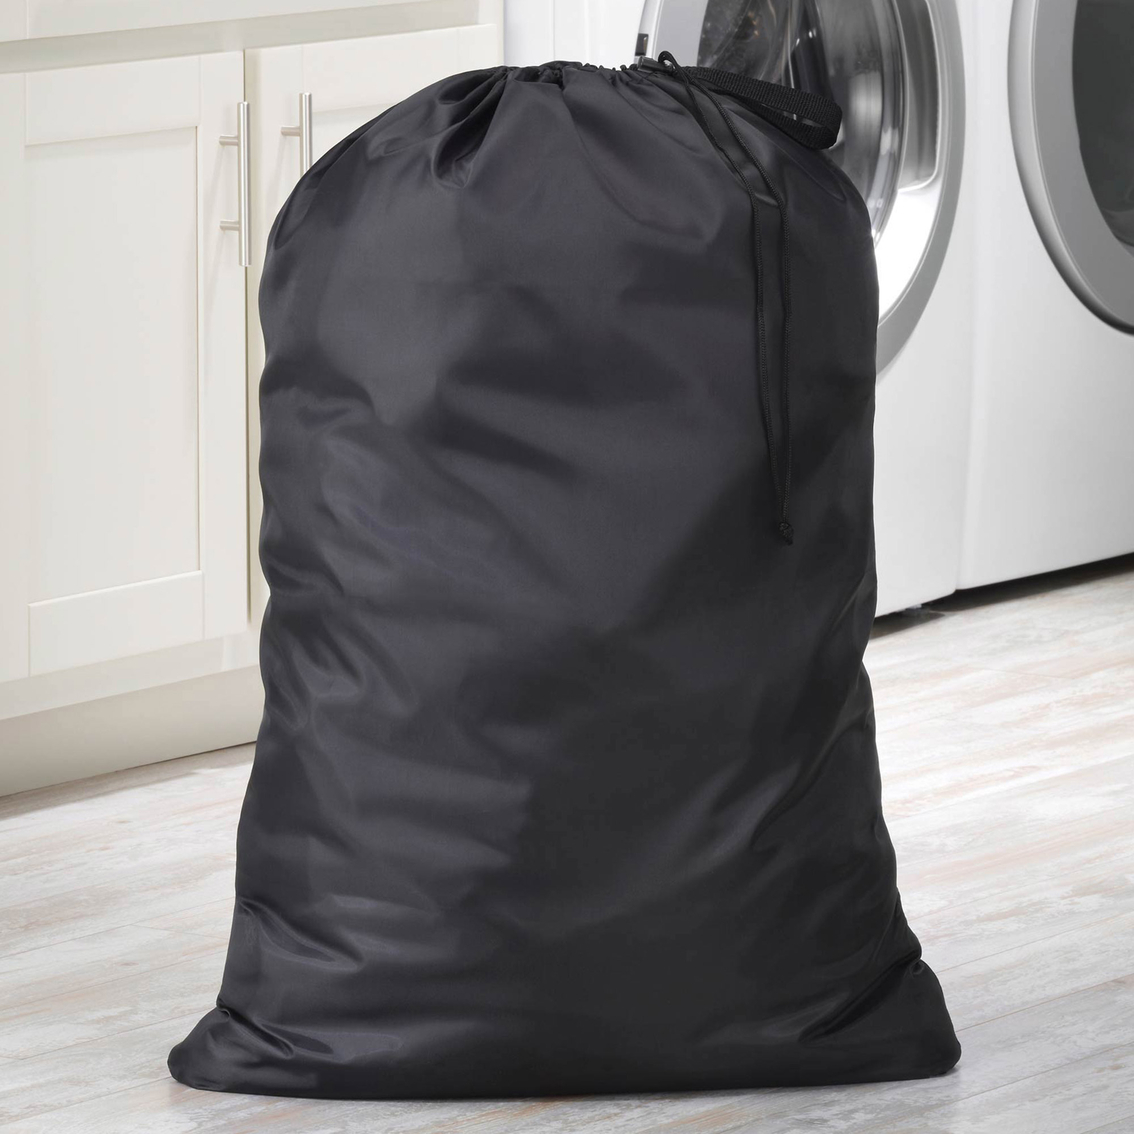 Whitmor Dura Clean Laundry Bag - Image 7 of 7